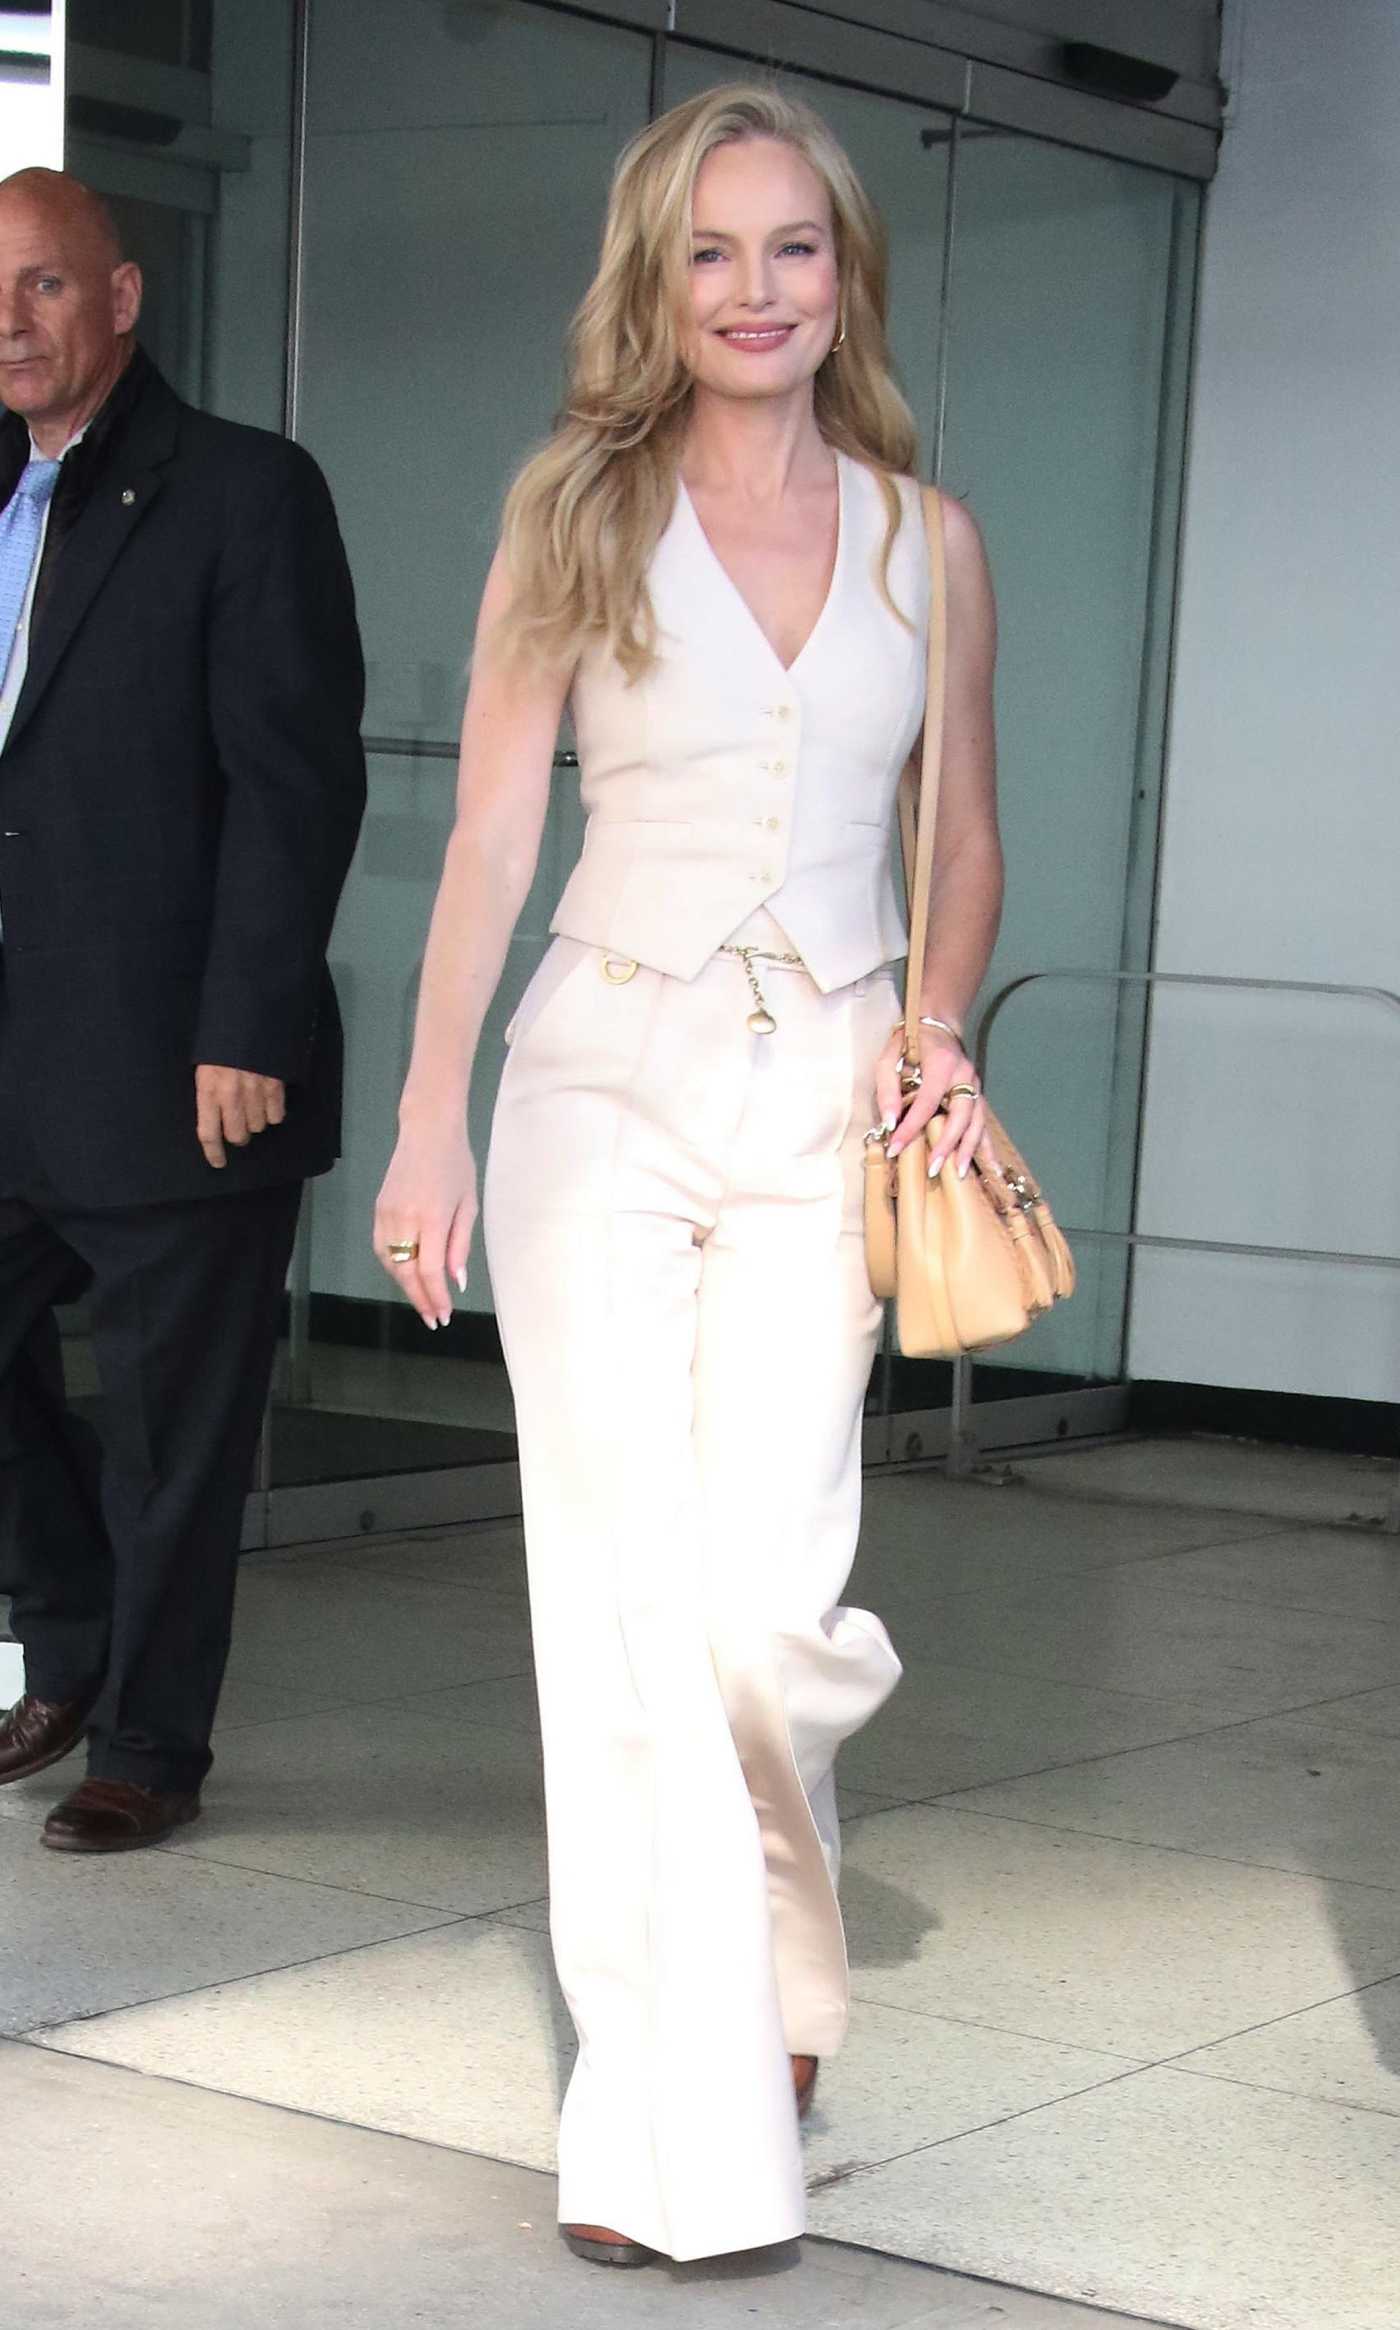 Kate Bosworth in a White Ensemble Exits The Drew Barrymore Show in New York City 03/29/2023